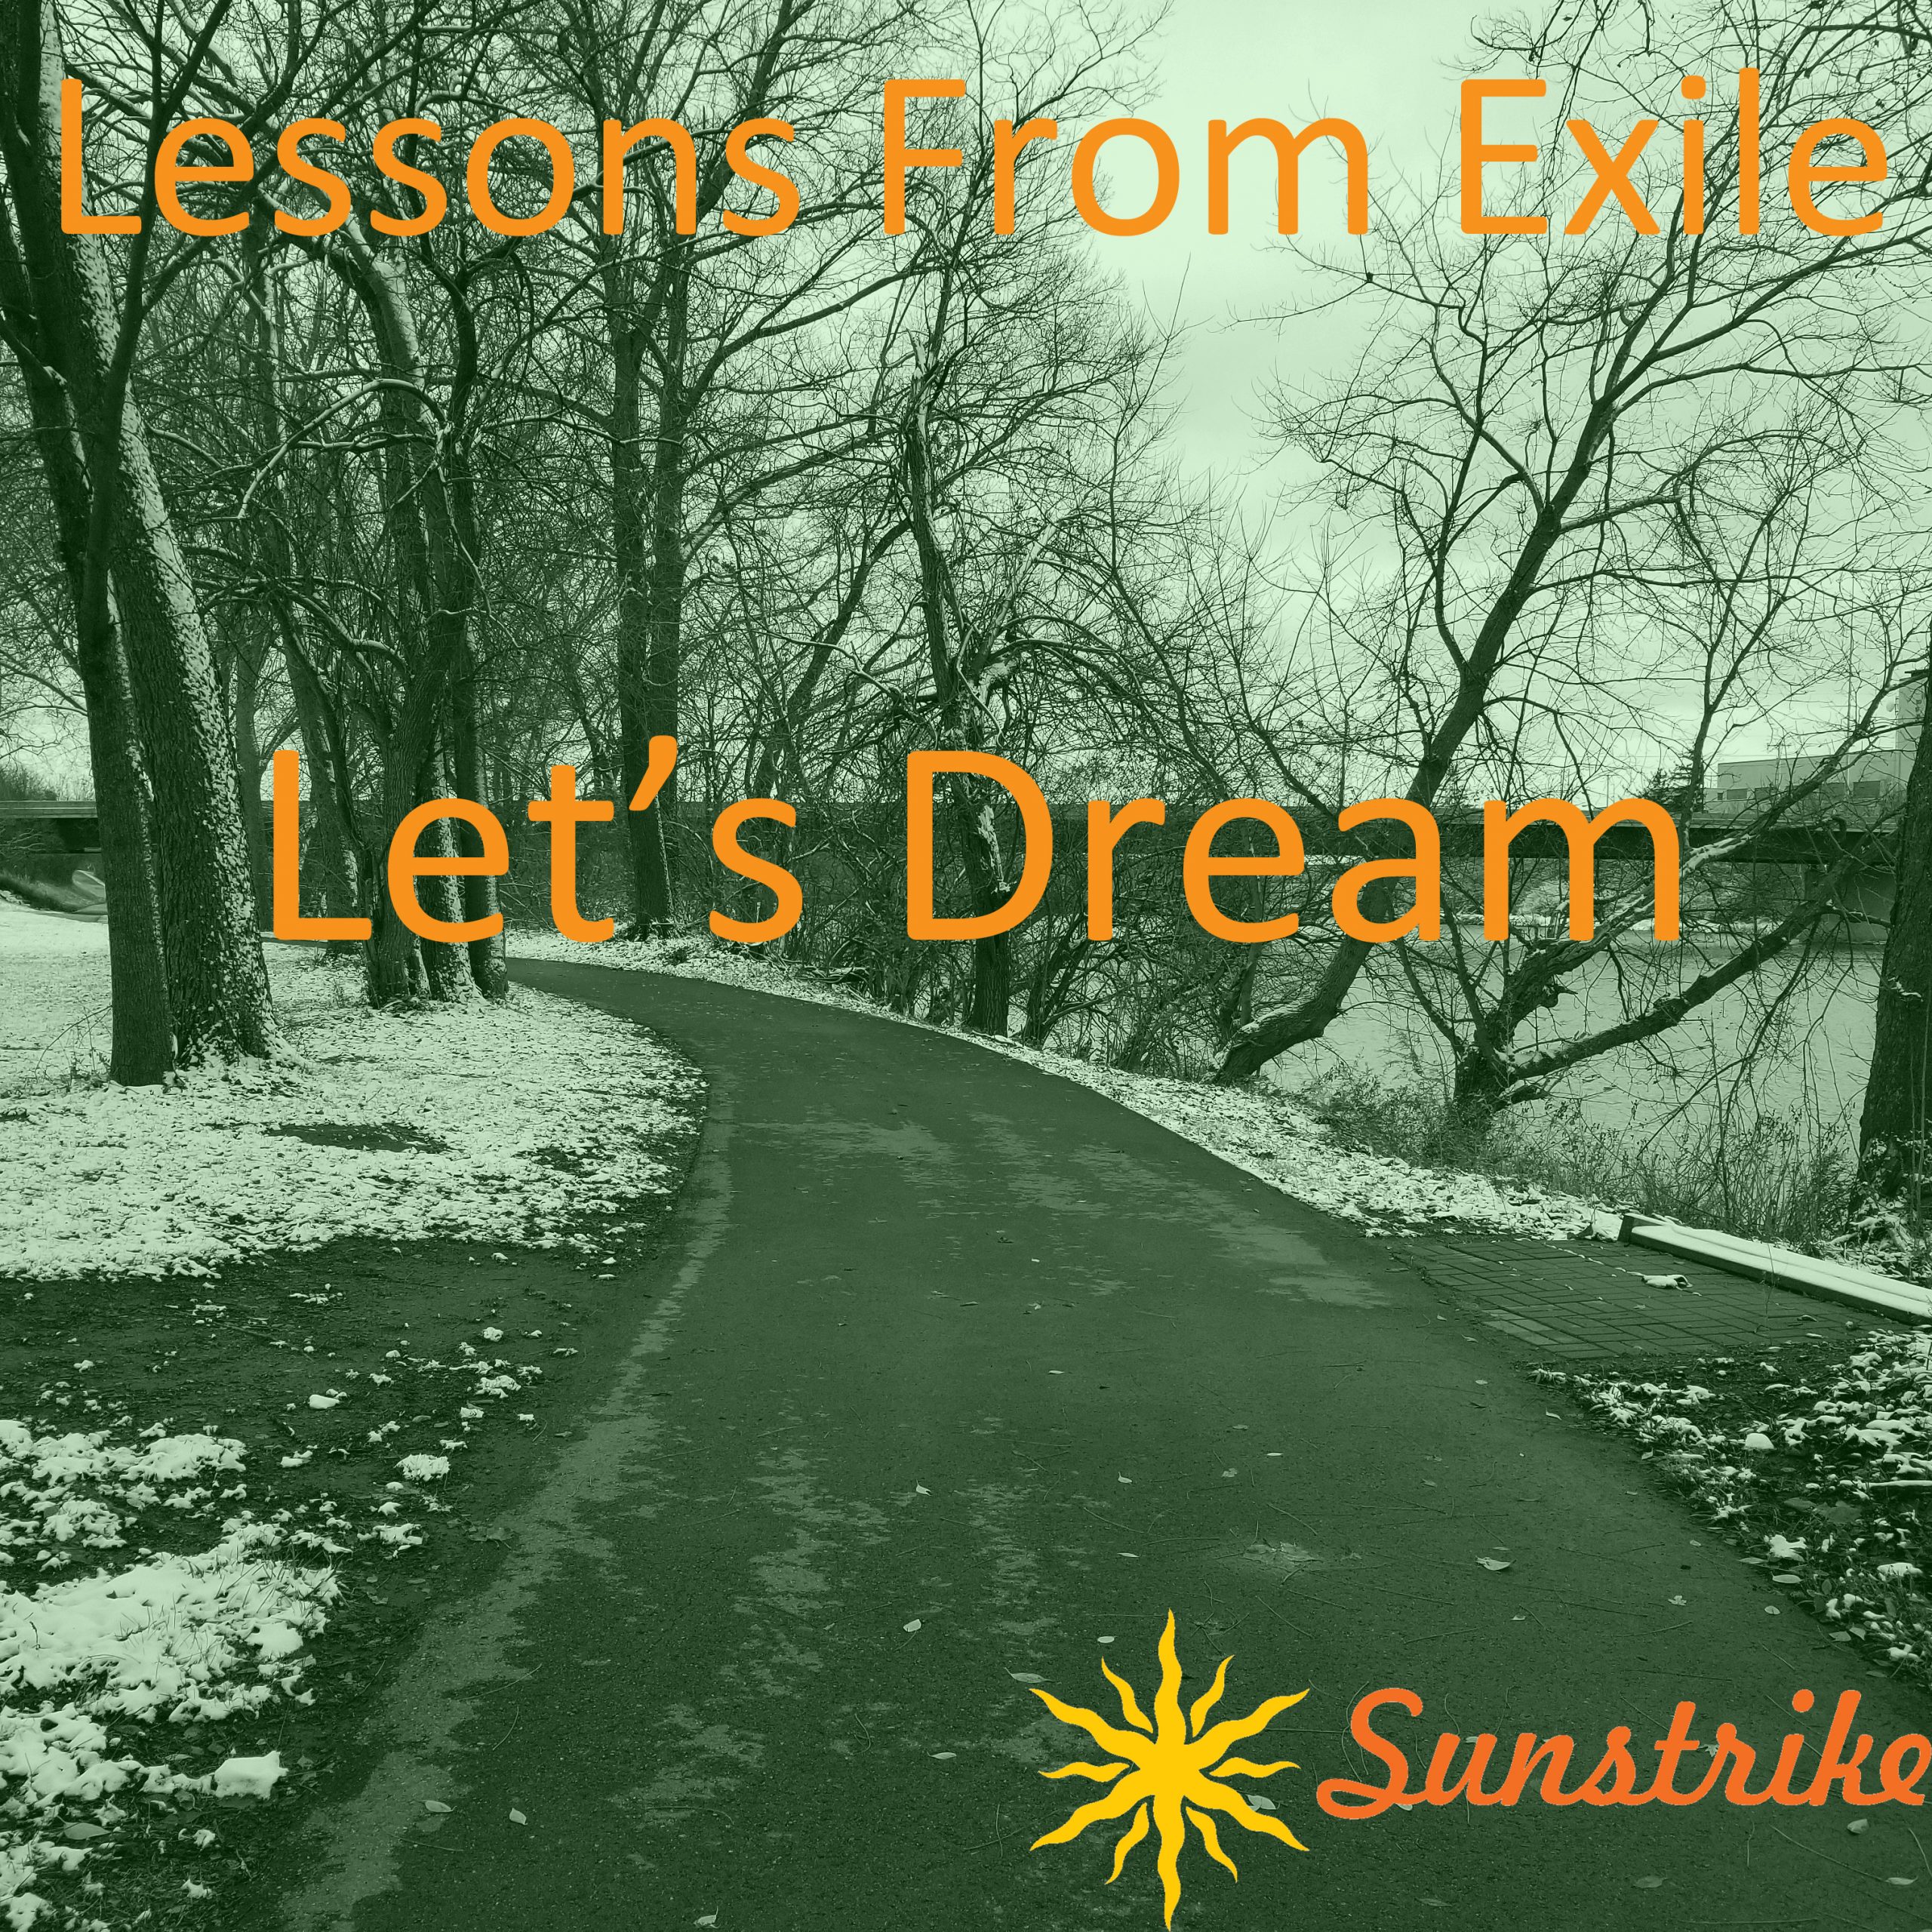 Lessons from Exile #100: Let’s Dream